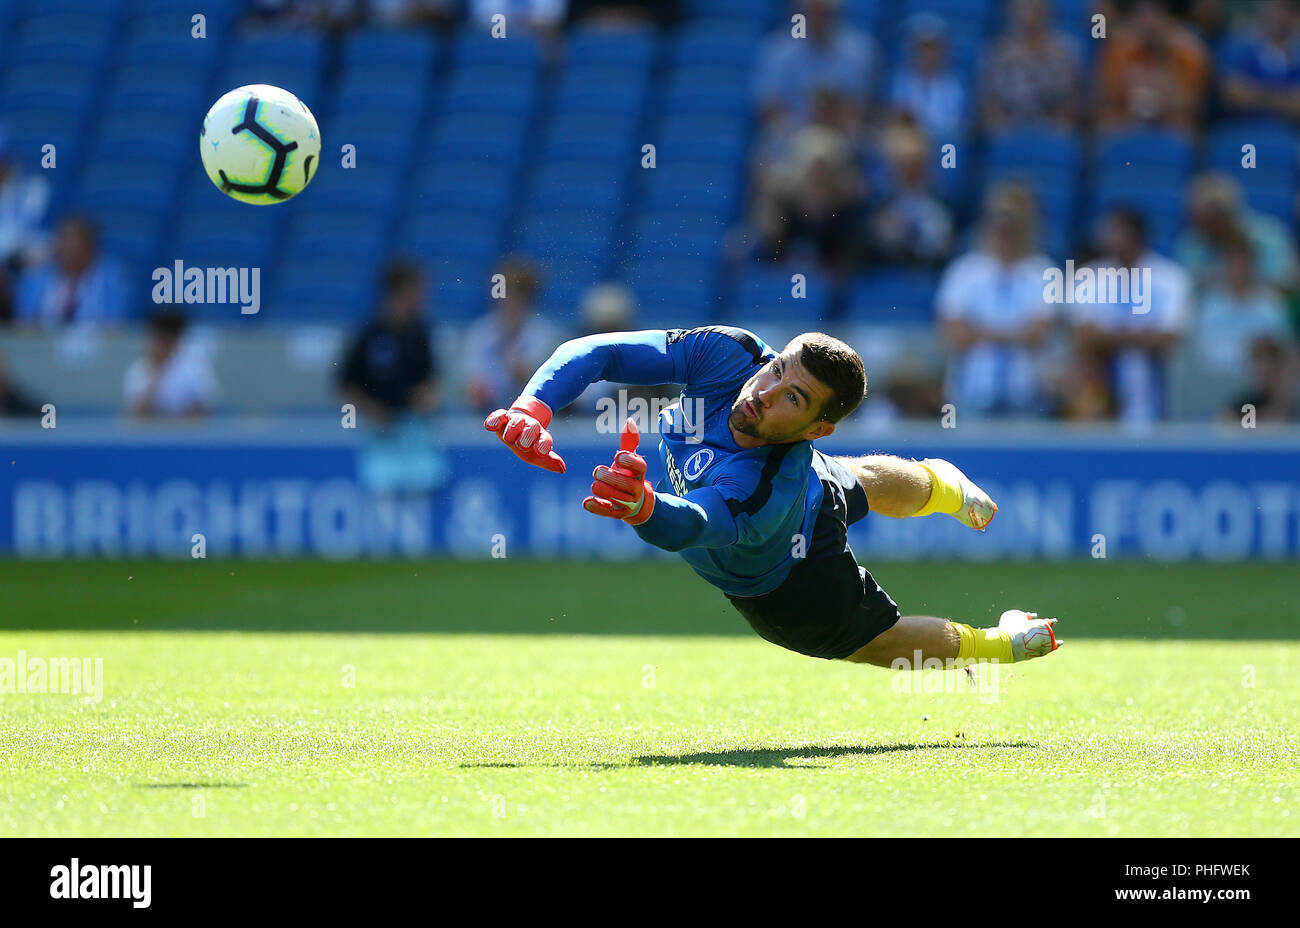 Brighton & Hove Albion goalkeeper Mathew Ryan before the Premier League match at the AMEX Stadium, Brighton. PRESS ASSOCIATION Photo. Picture date: Saturday September 1, 2018. See PA story SOCCER Brighton. Photo credit should read: Gareth Fuller/PA Wire. RESTRICTIONS: No use with unauthorised audio, video, data, fixture lists, club/league logos or 'live' services. Online in-match use limited to 120 images, no video emulation. No use in betting, games or single club/league/player publications. Stock Photo